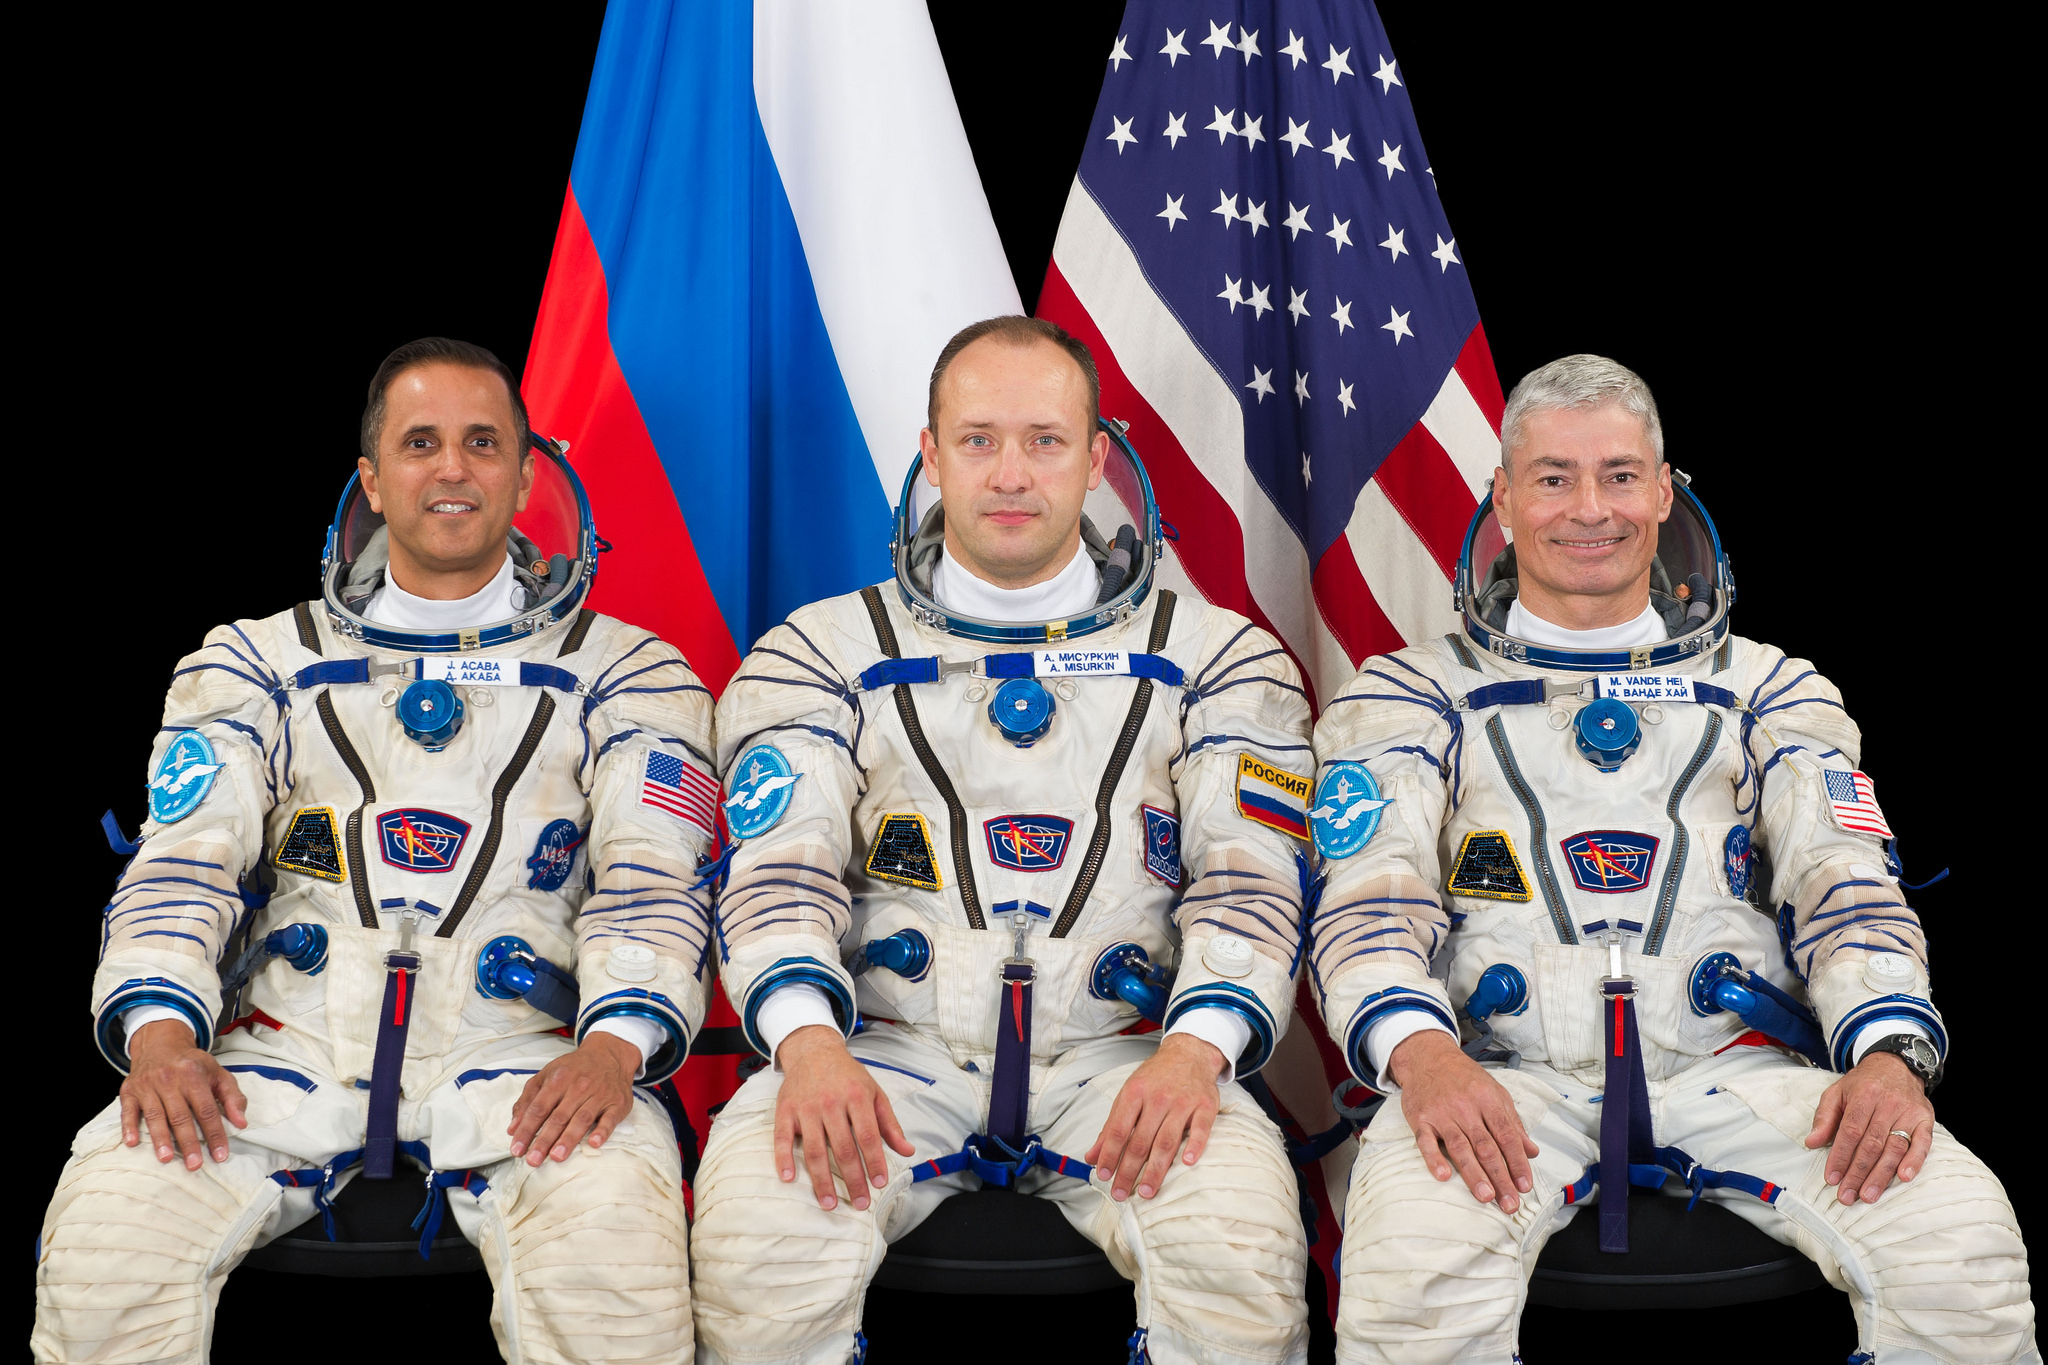 Expedition 53 crew members